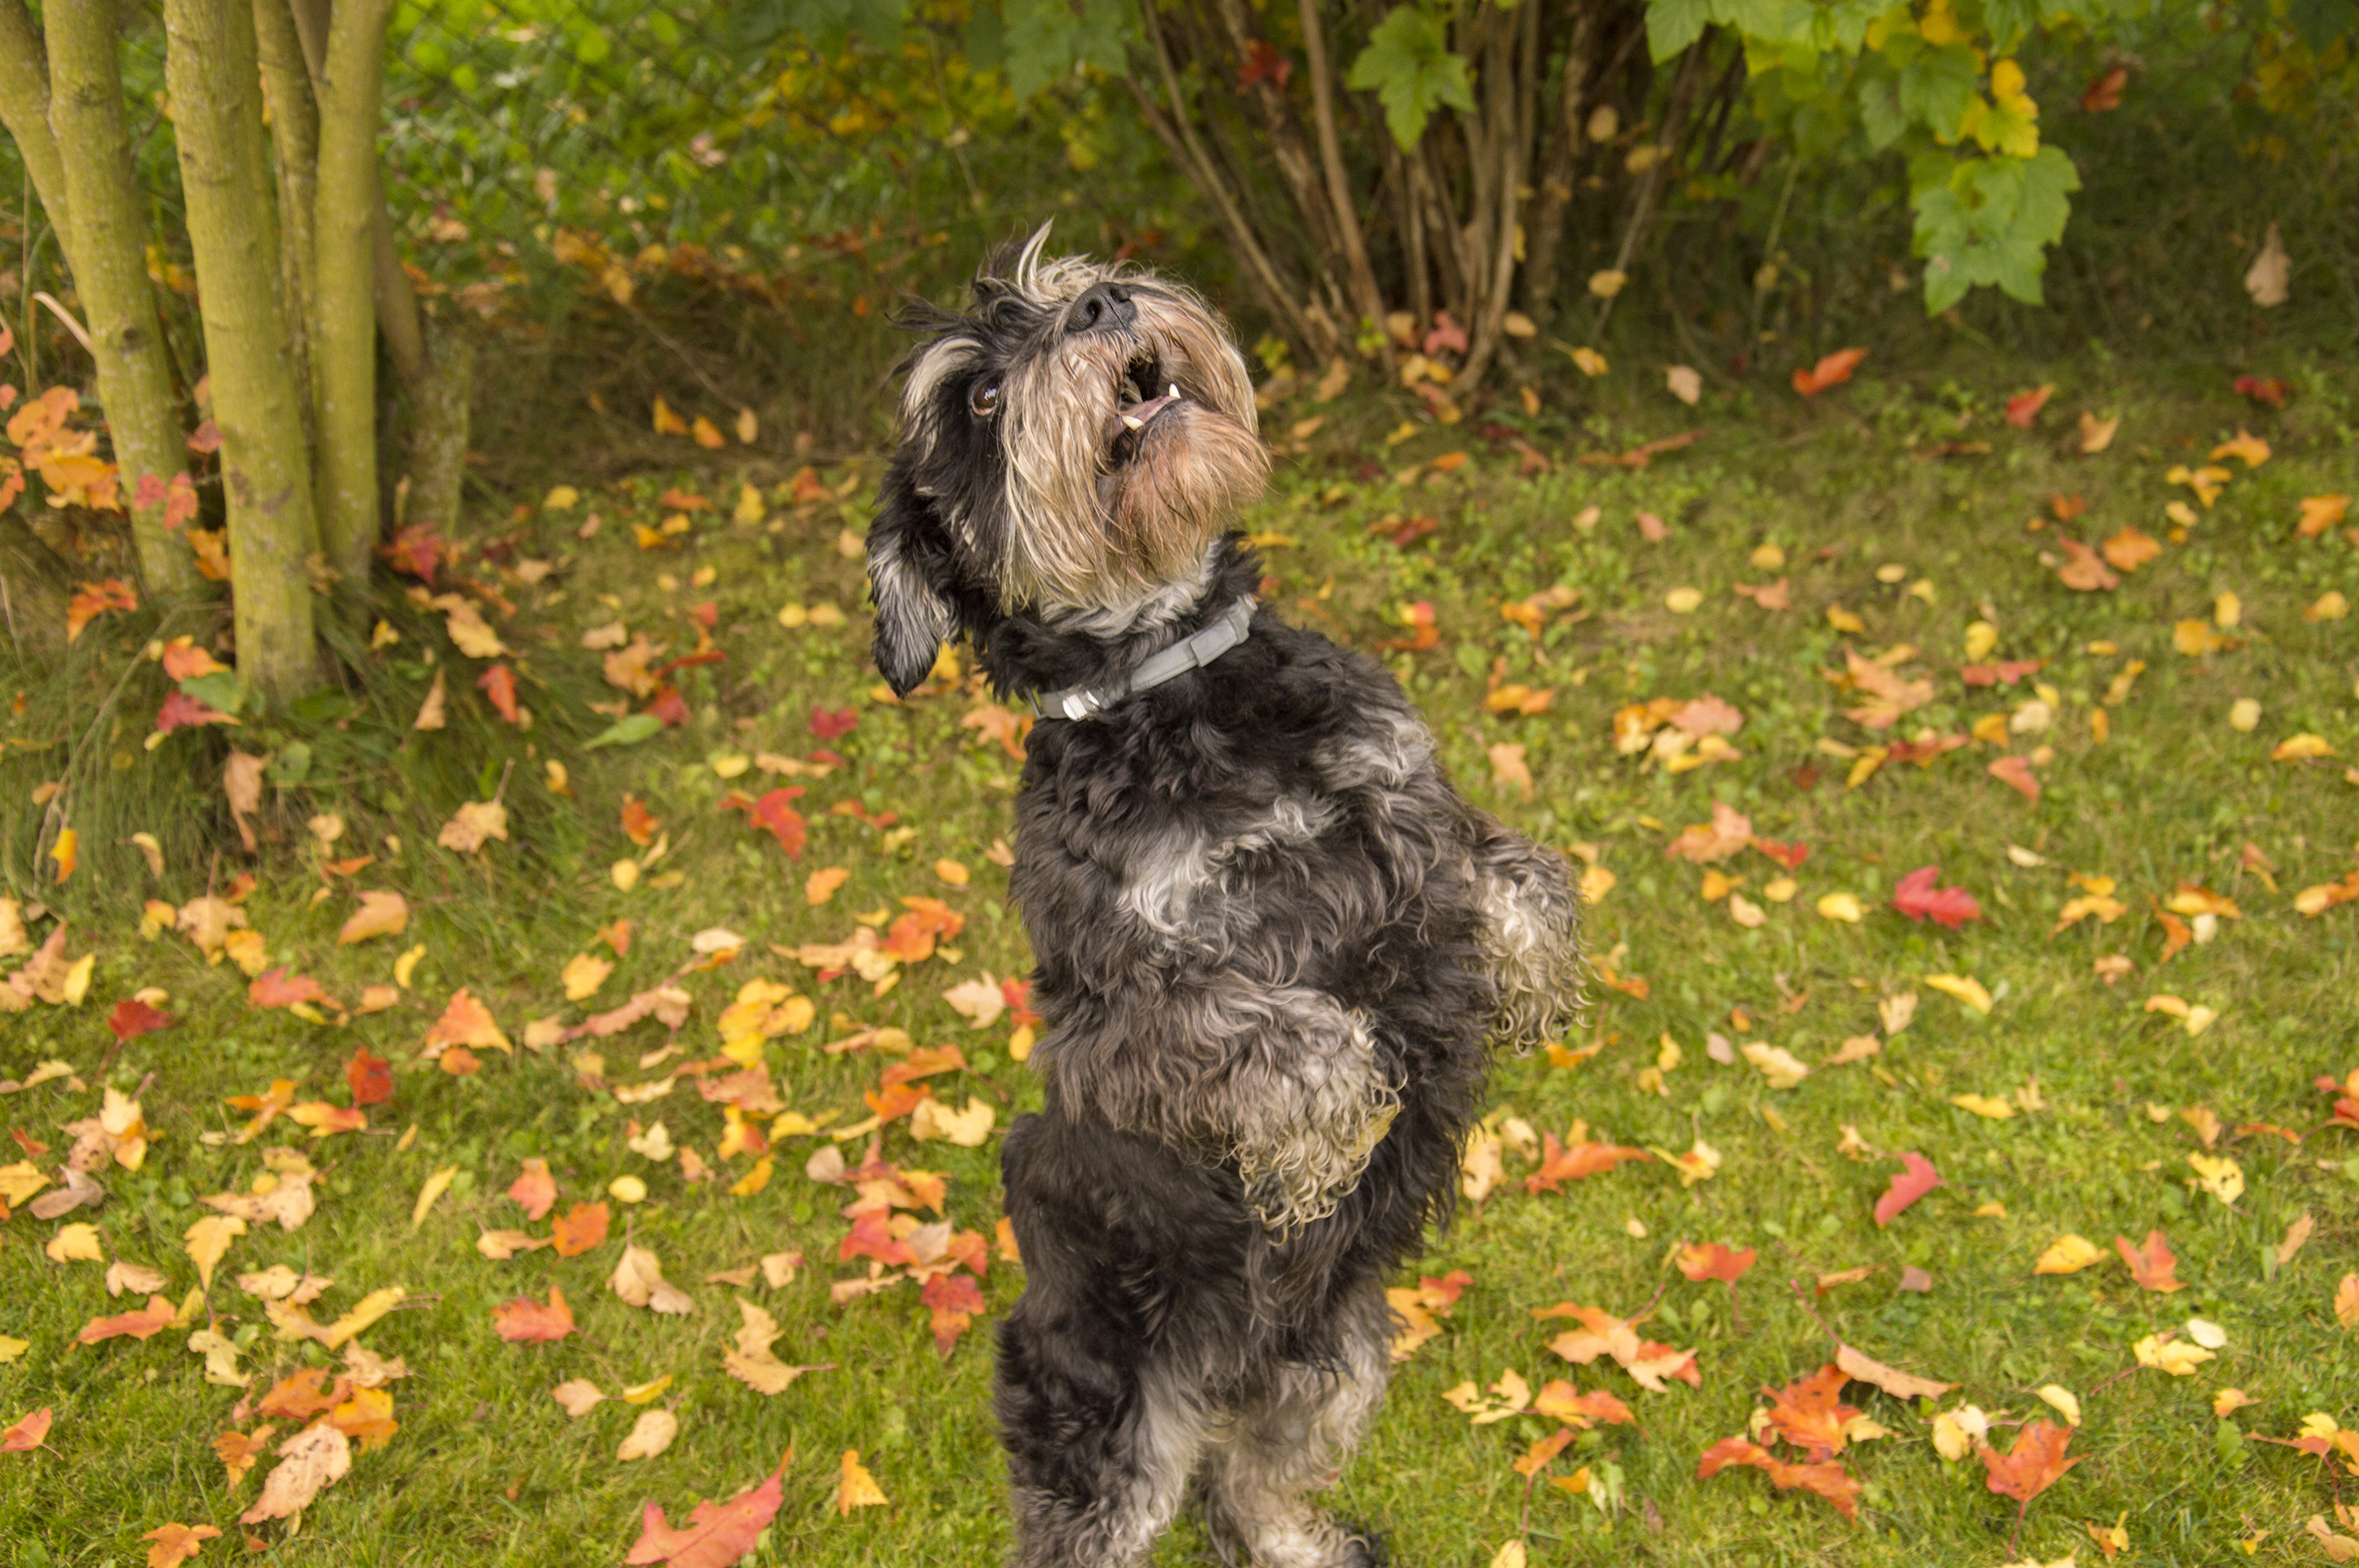 A miniature Schnauzer playing on the lawn.